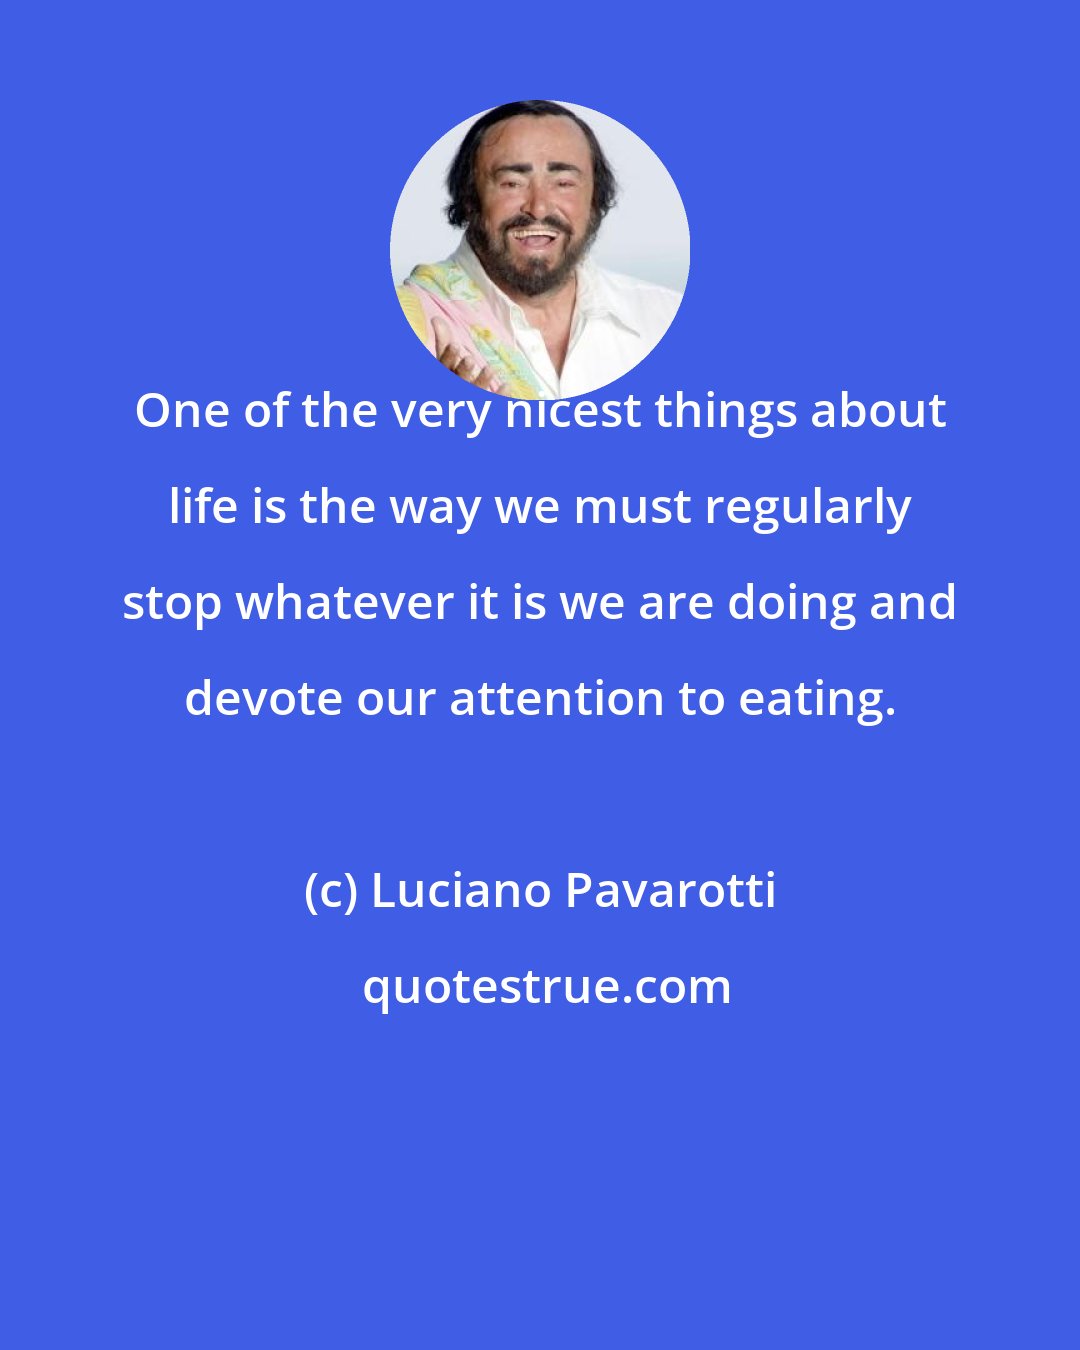 Luciano Pavarotti: One of the very nicest things about life is the way we must regularly stop whatever it is we are doing and devote our attention to eating.